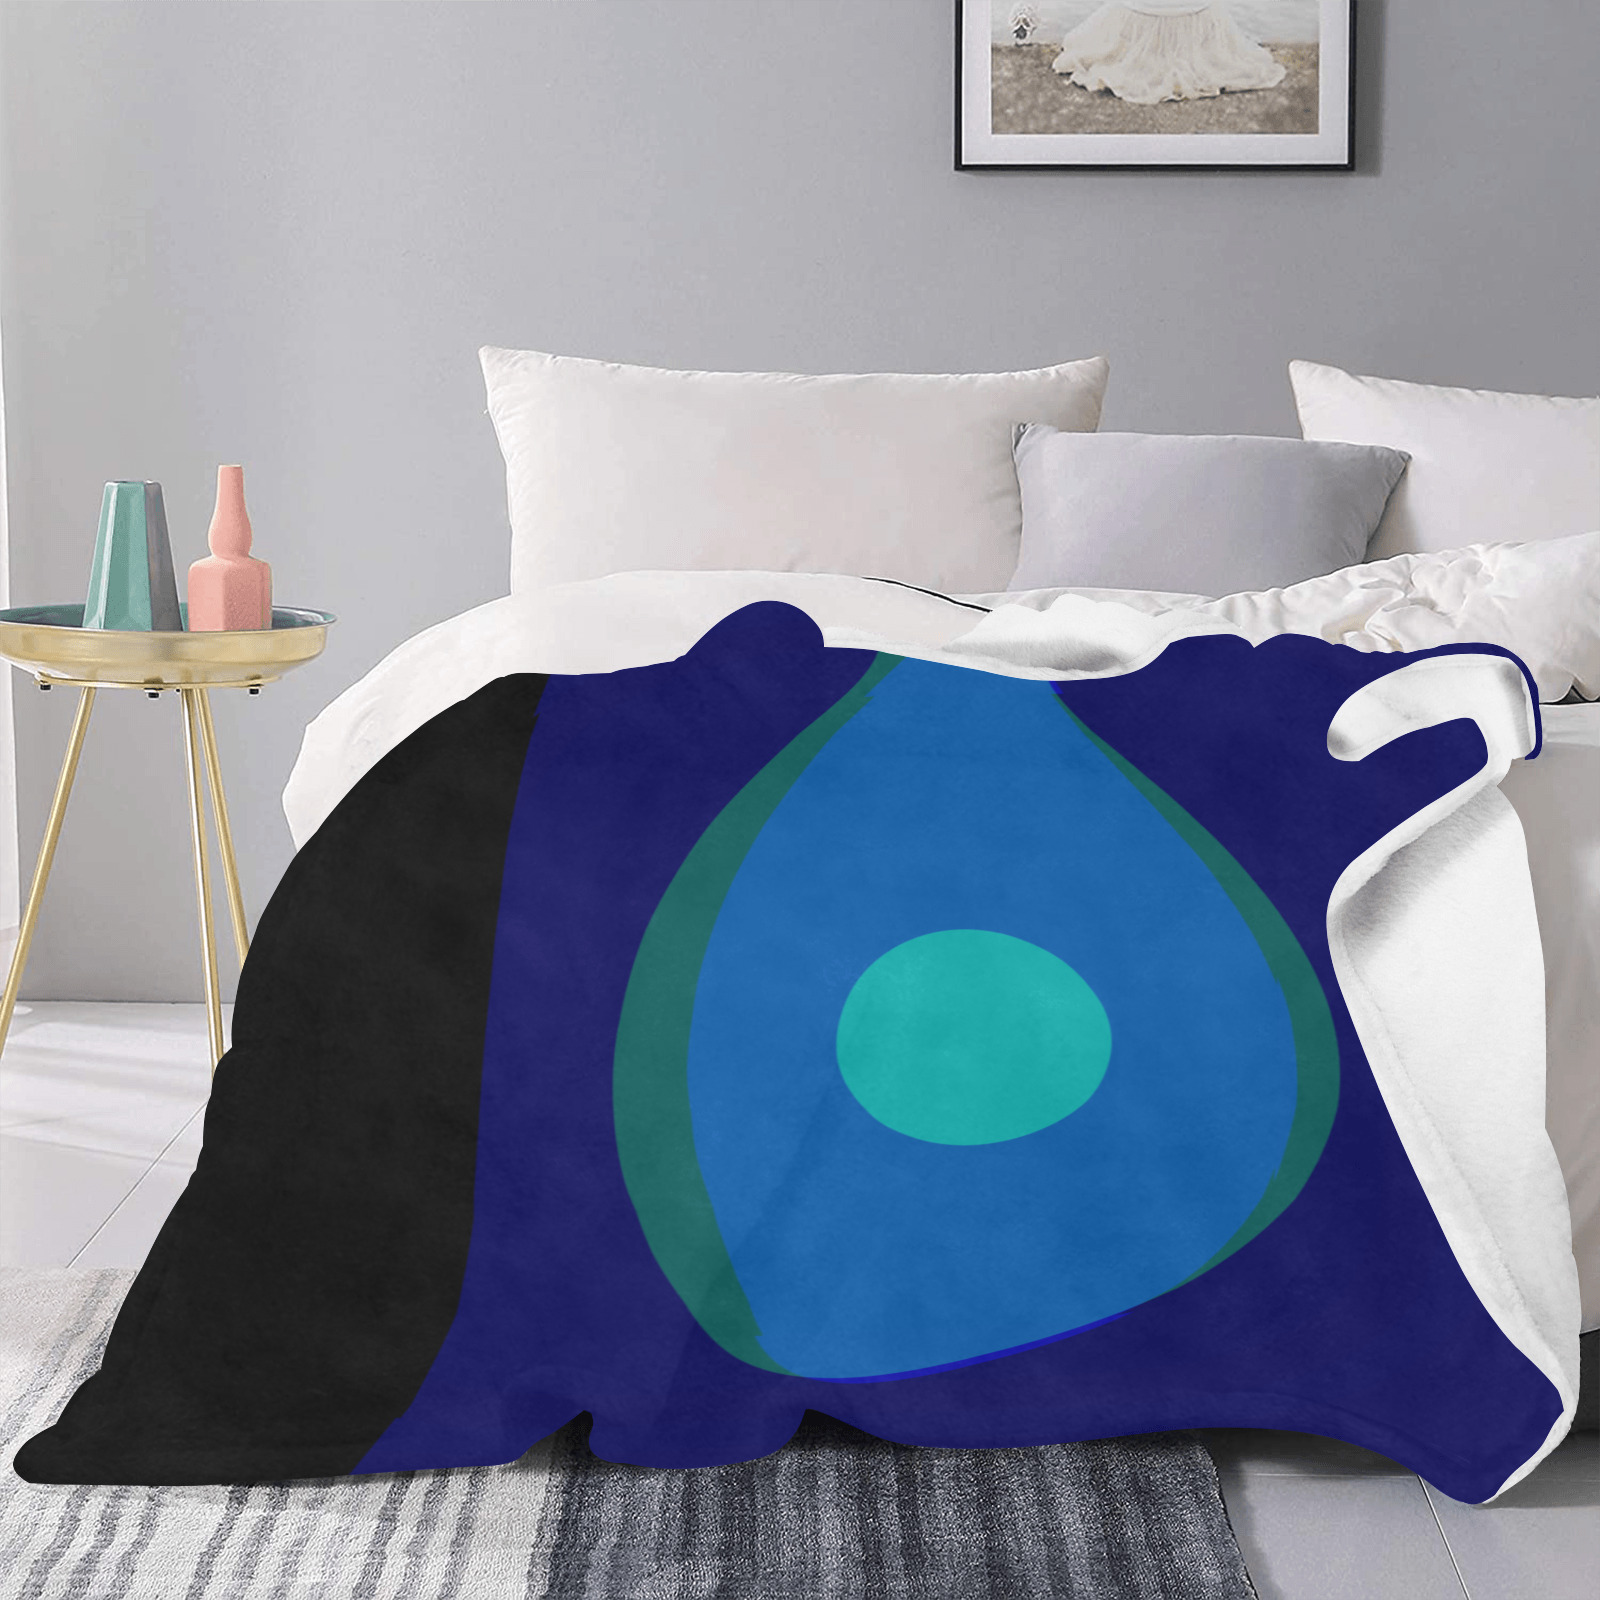 Dimensional Blue Abstract 915 Ultra-Soft Micro Fleece Blanket 40"x50" (Thick)